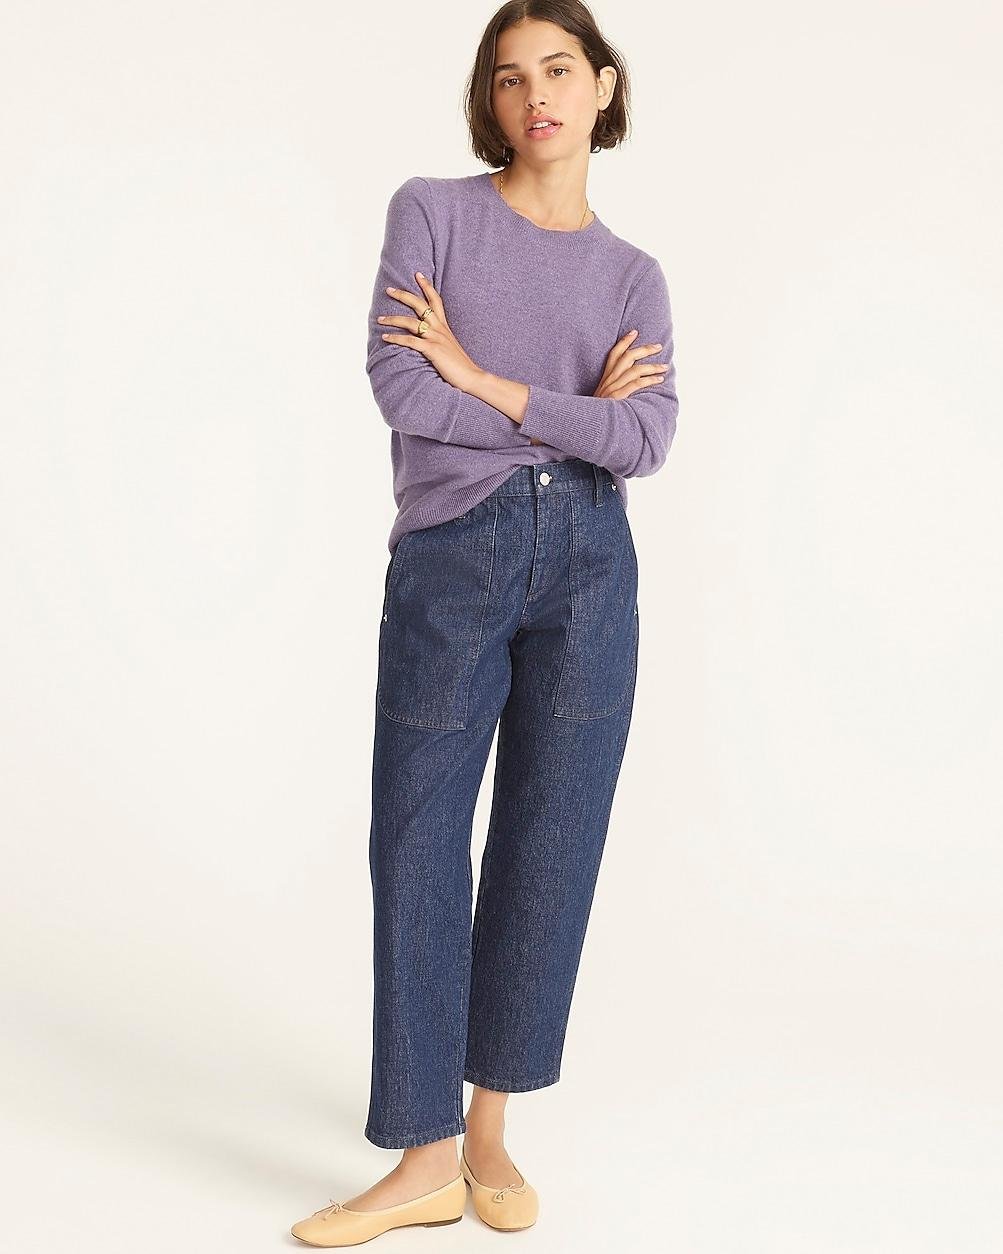 Cashmere classic-fit crewneck sweater by J.CREW